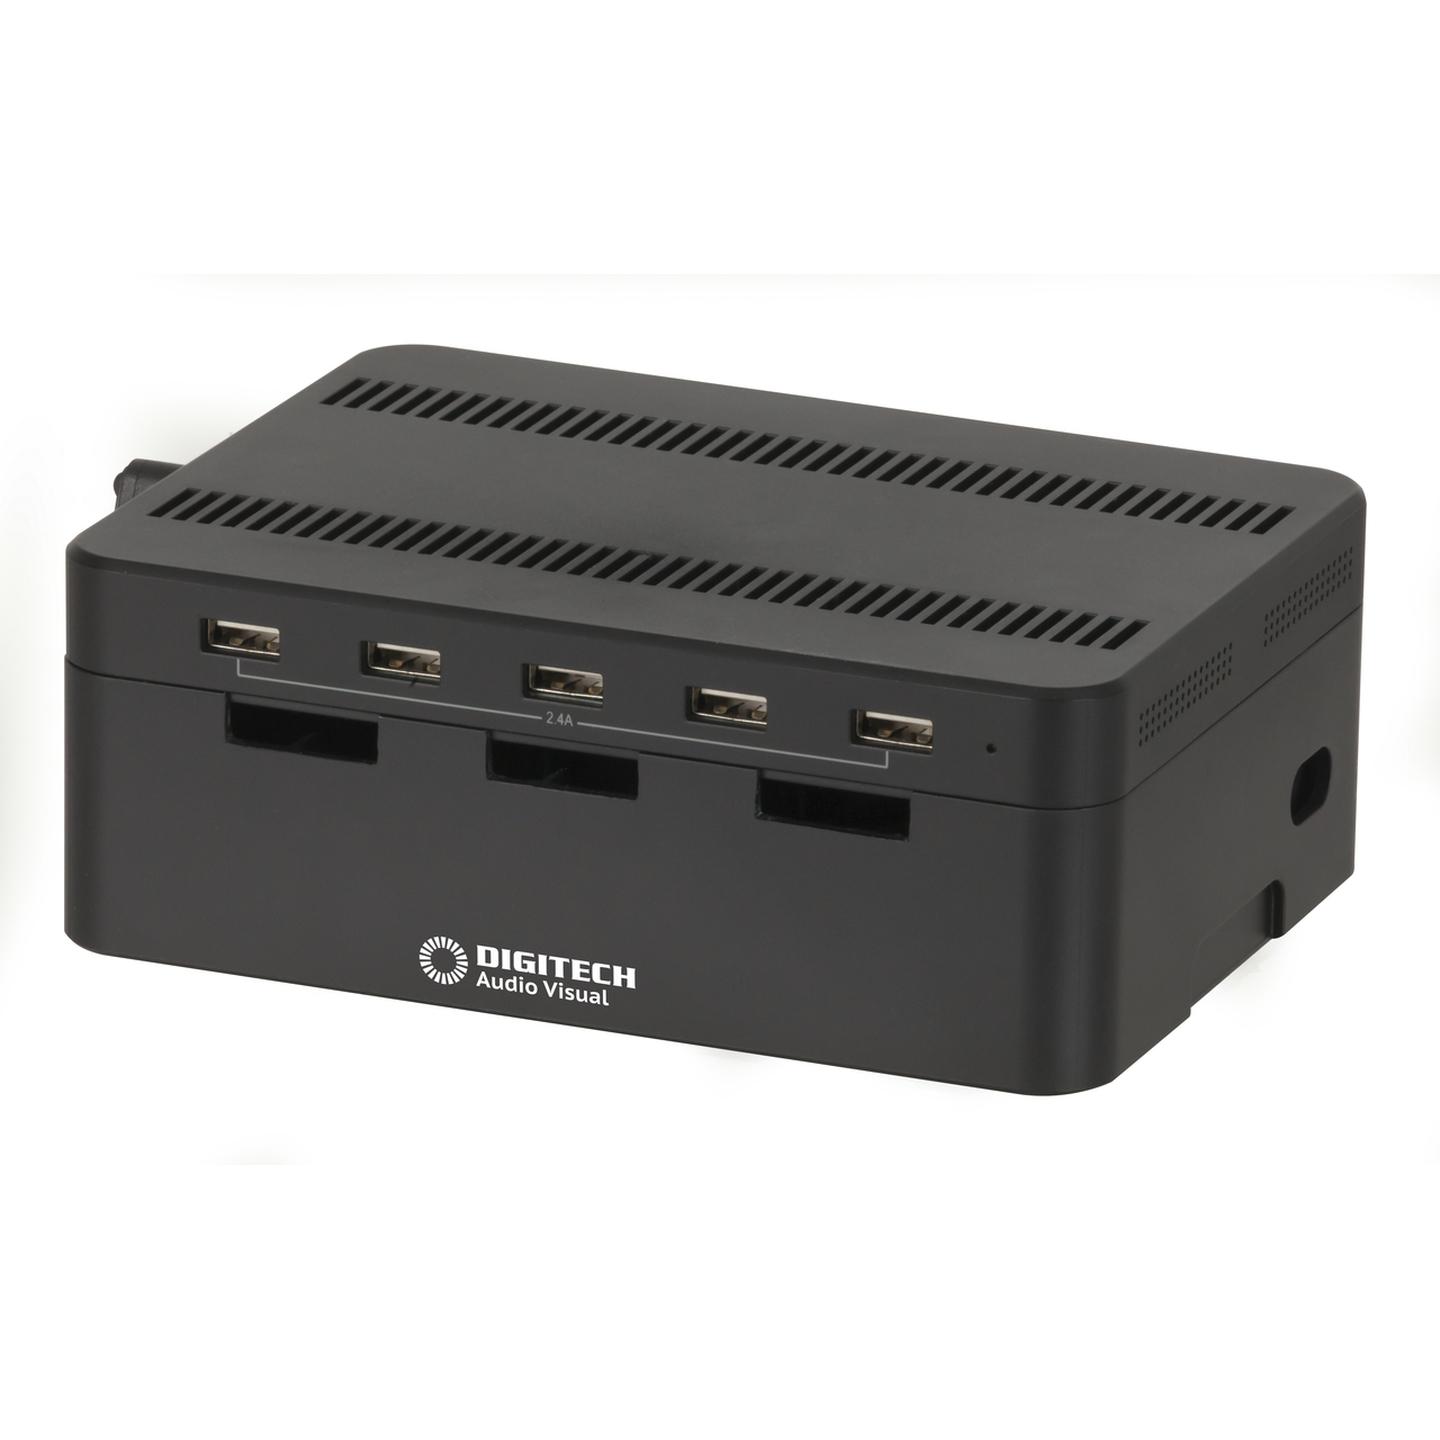 5 Port USB Charging Station with Storage Compartment